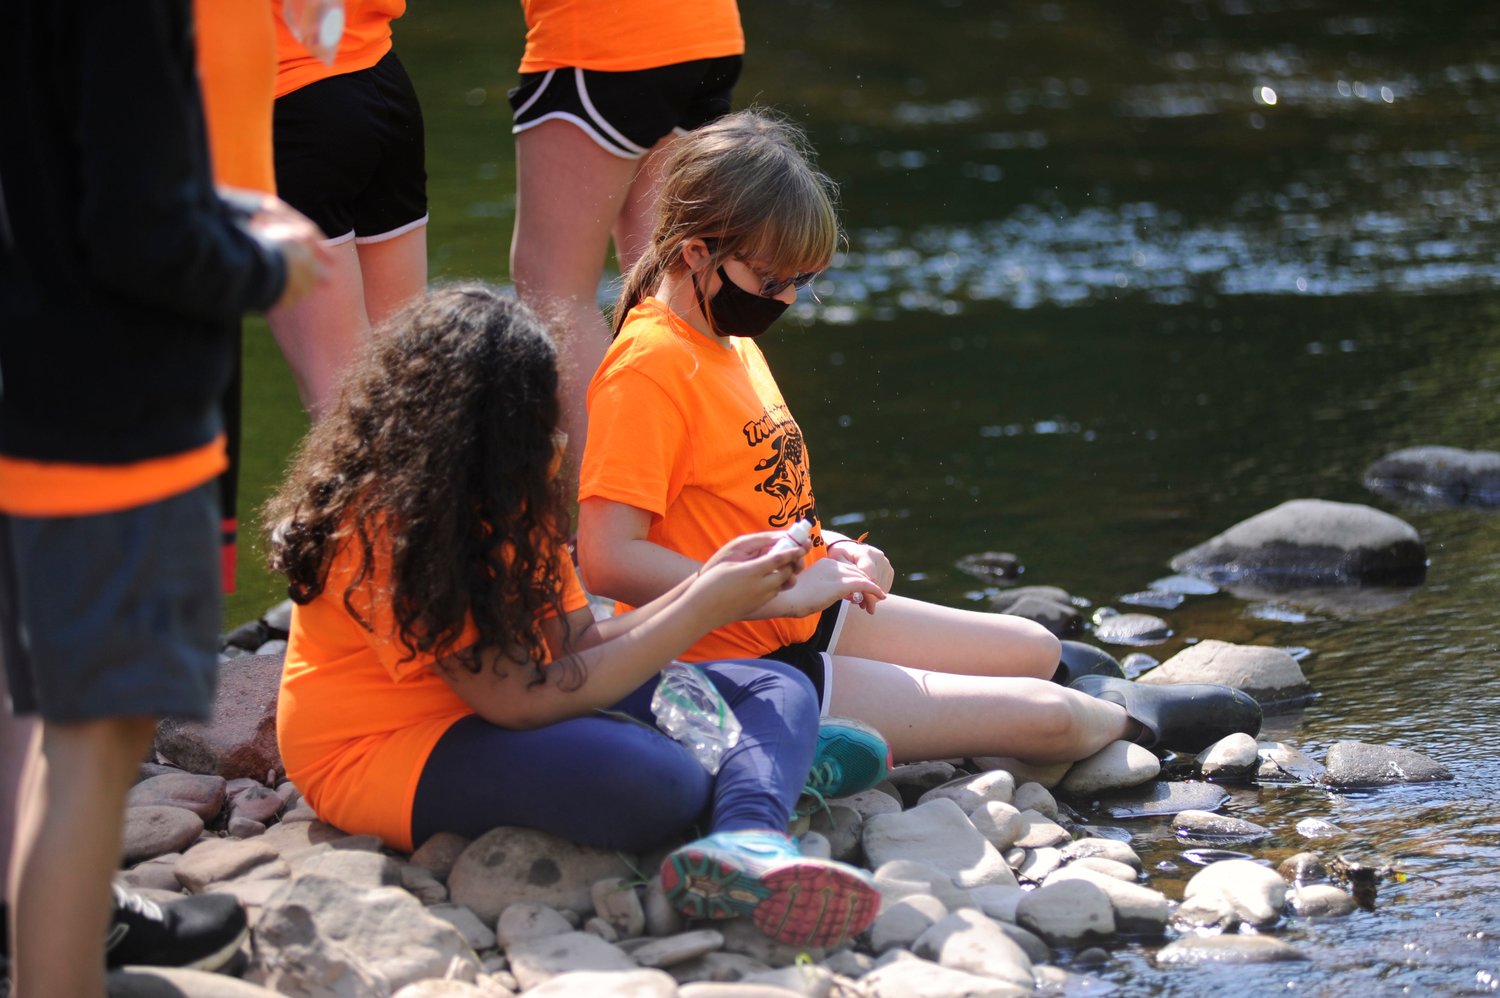 Testing the waters. Students tested the water quality of Callicoon Creek at one of the hands-on learning stations.